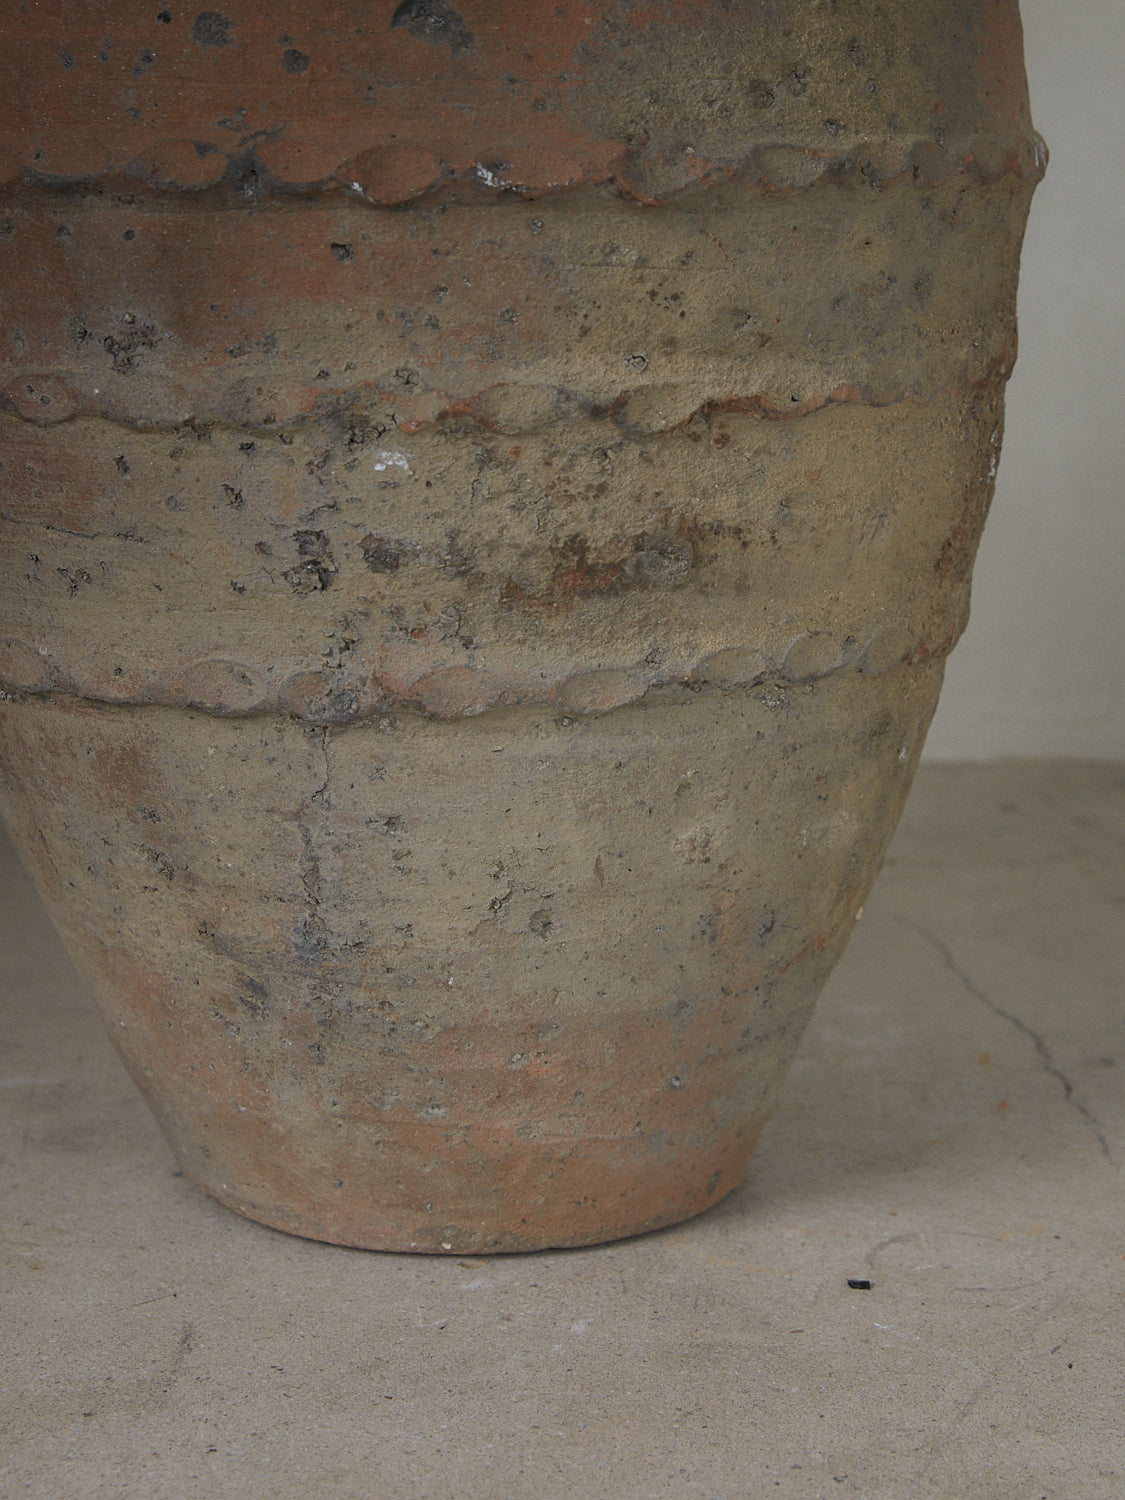 Authentic terracotta vintage vessel originally purposed for storing olive oil with banded braiding details throughout. 